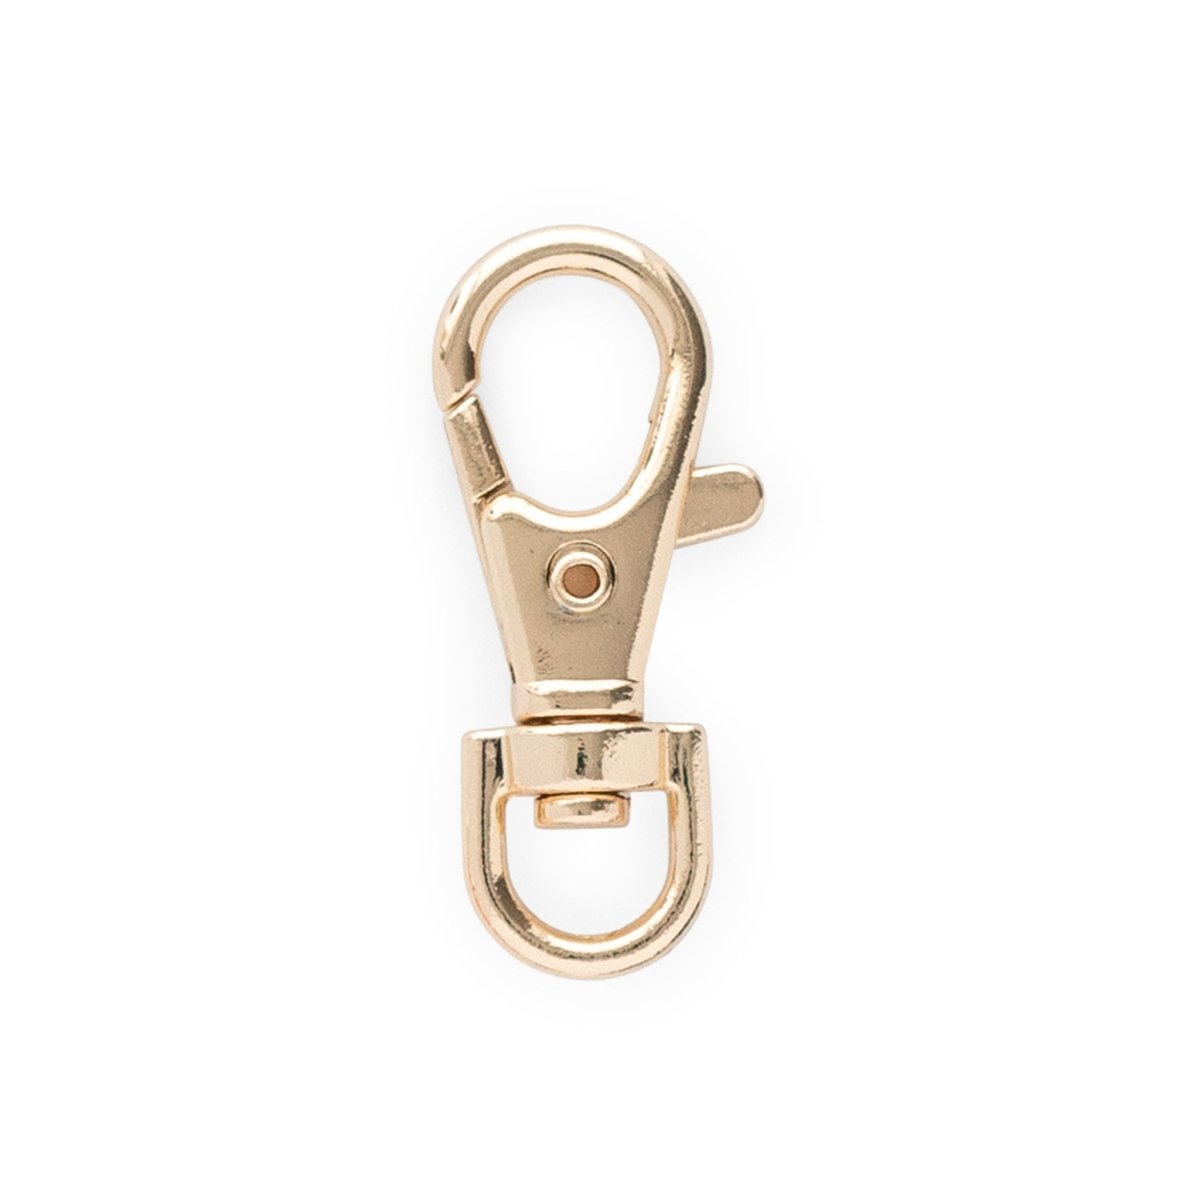 Lanyards Premium Lanyard Clip - Small Hook Soft Gold from Cara & Co Craft Supply